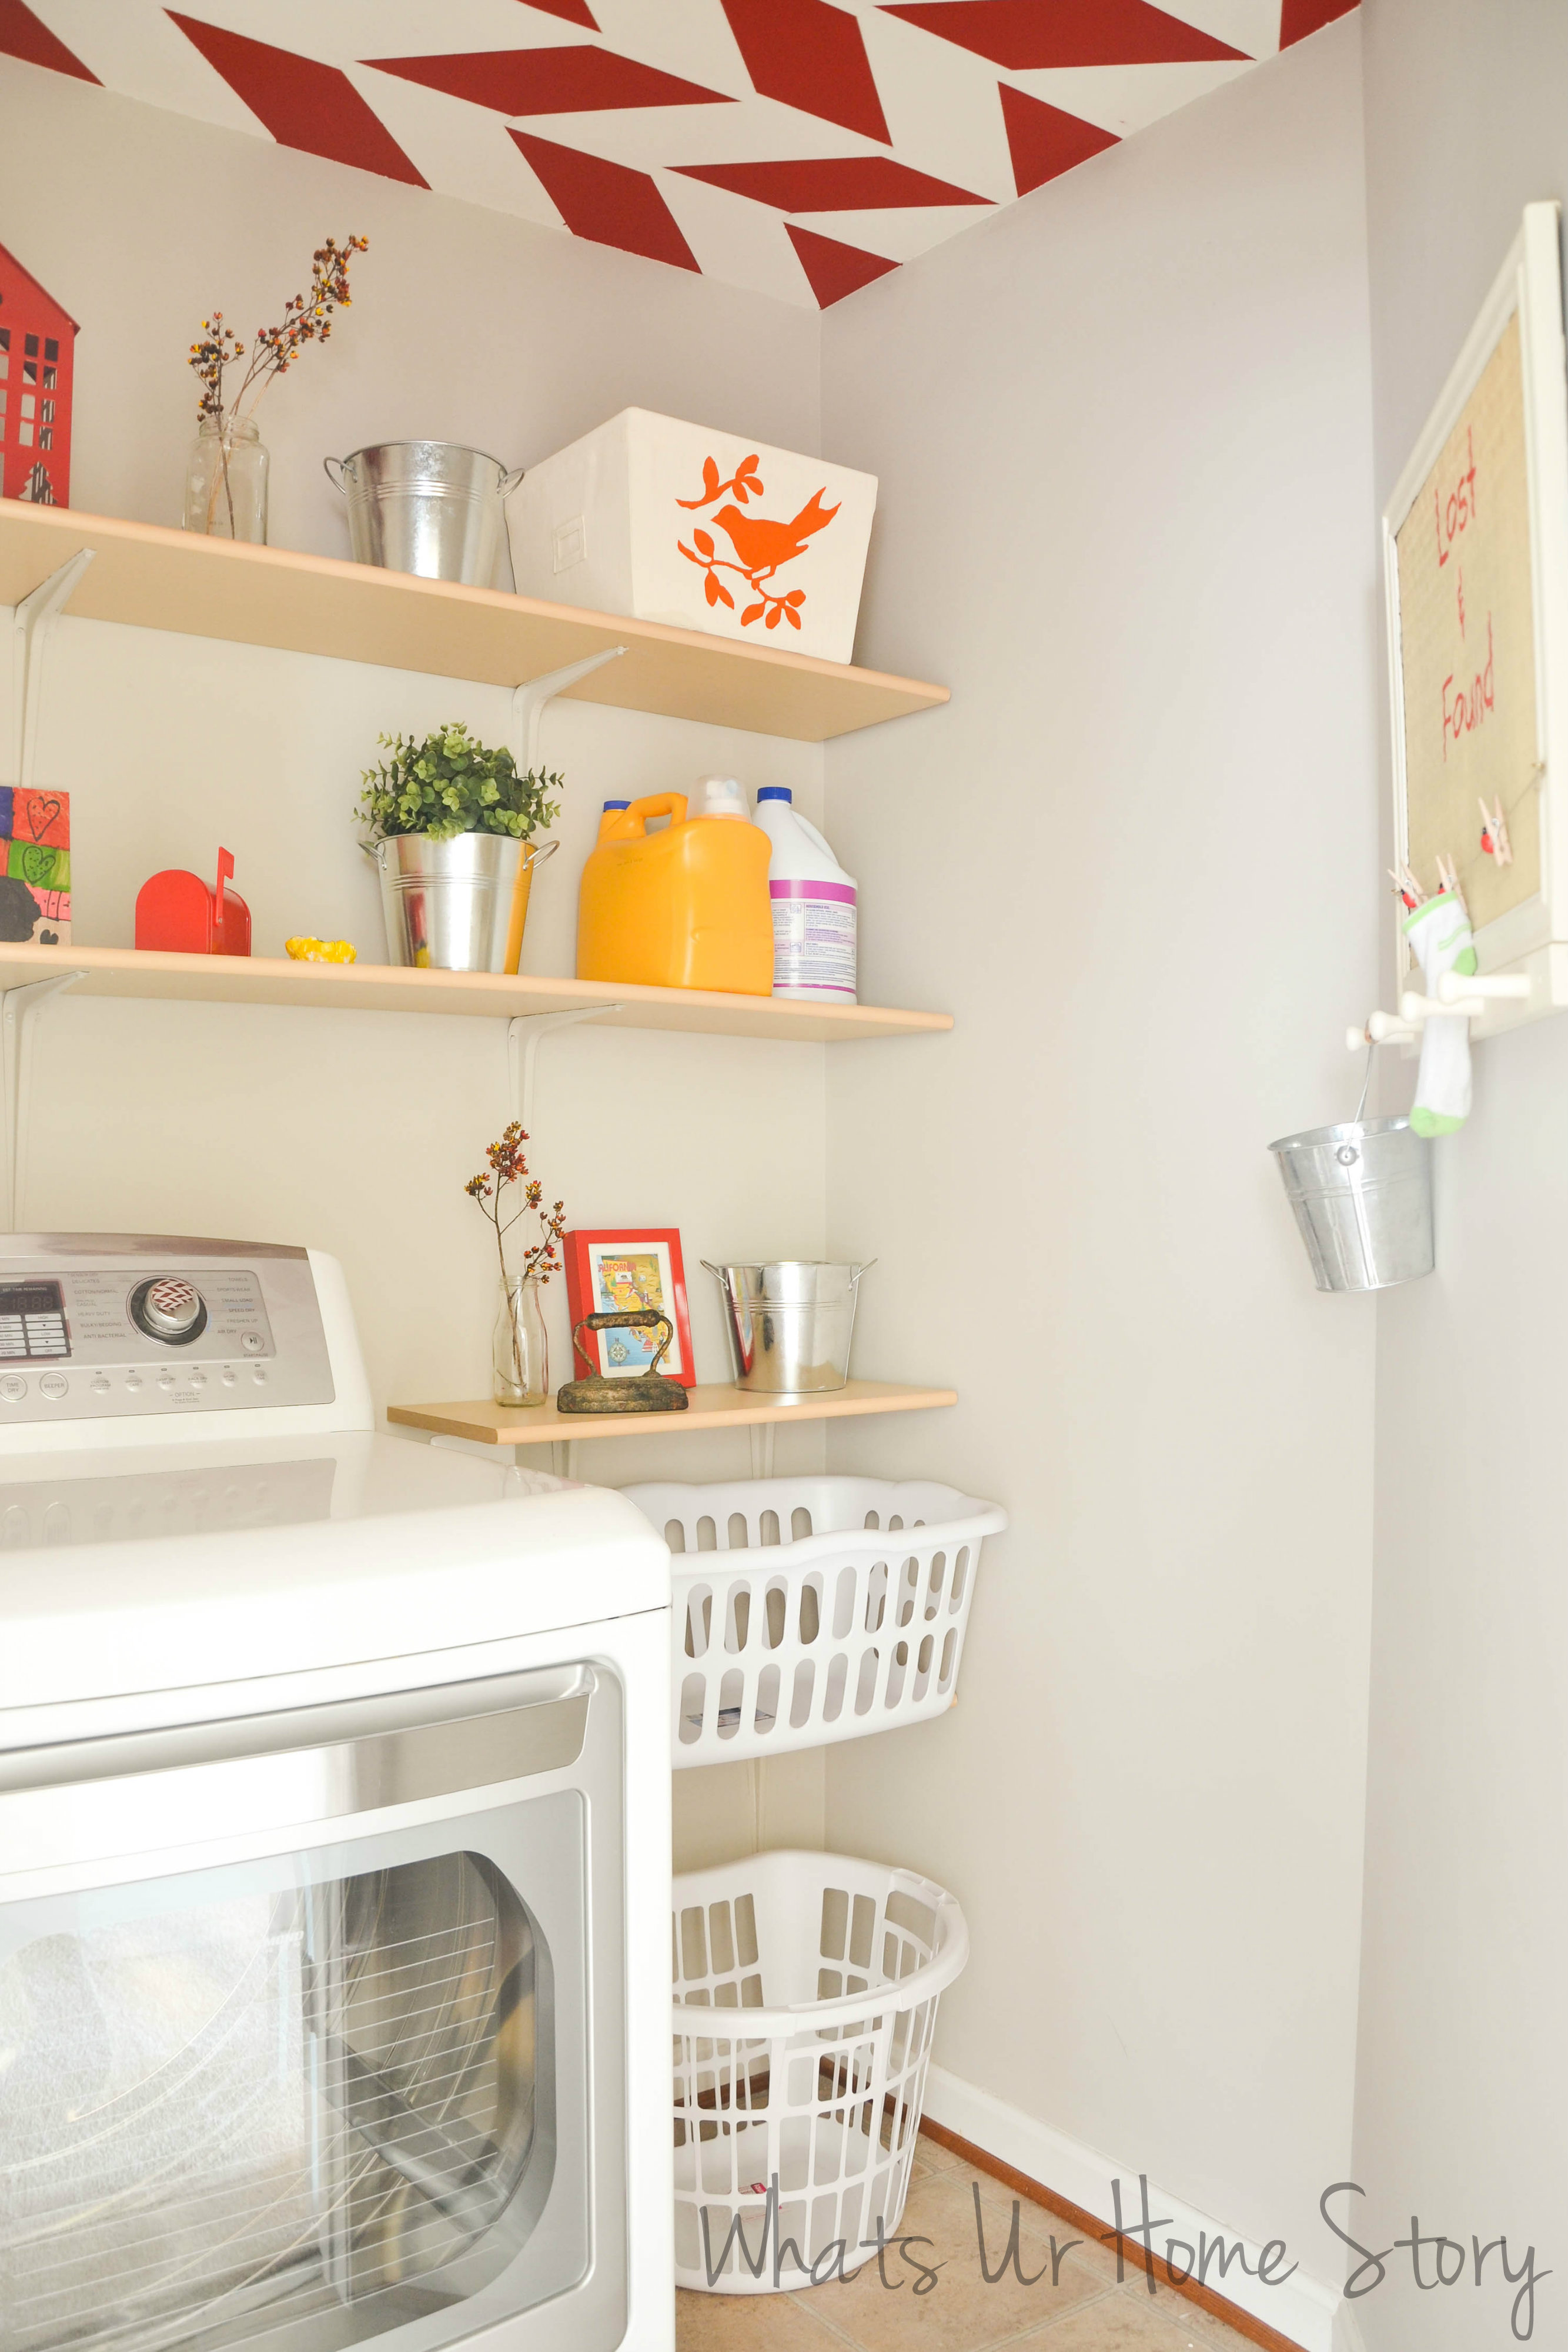 Laundry room with red accents